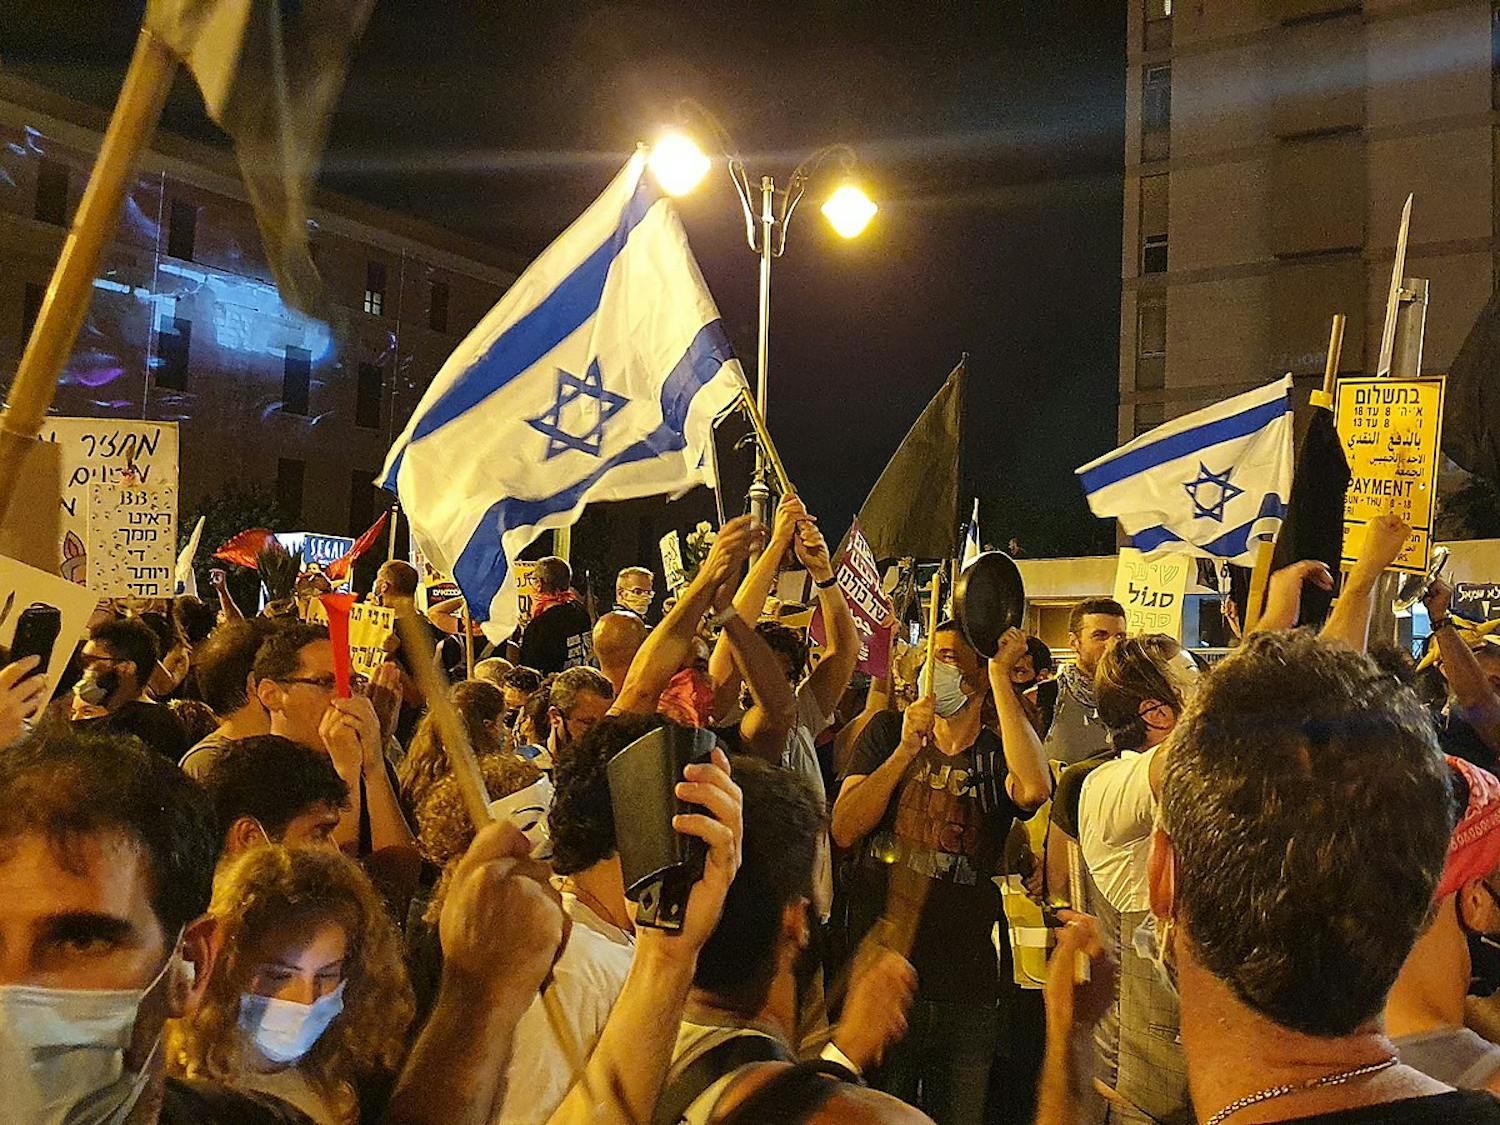 Mass protests have been taking place across Israel in opposition to Prime Minister Benjamin Netanyahu’s judicial overhaul plans (Photo courtesy of Wikimedia Commons/“Flags at Protests against Netanyahu 2020 Jerusalem” by Nir Hirshman Communications. August 1, 2020). 